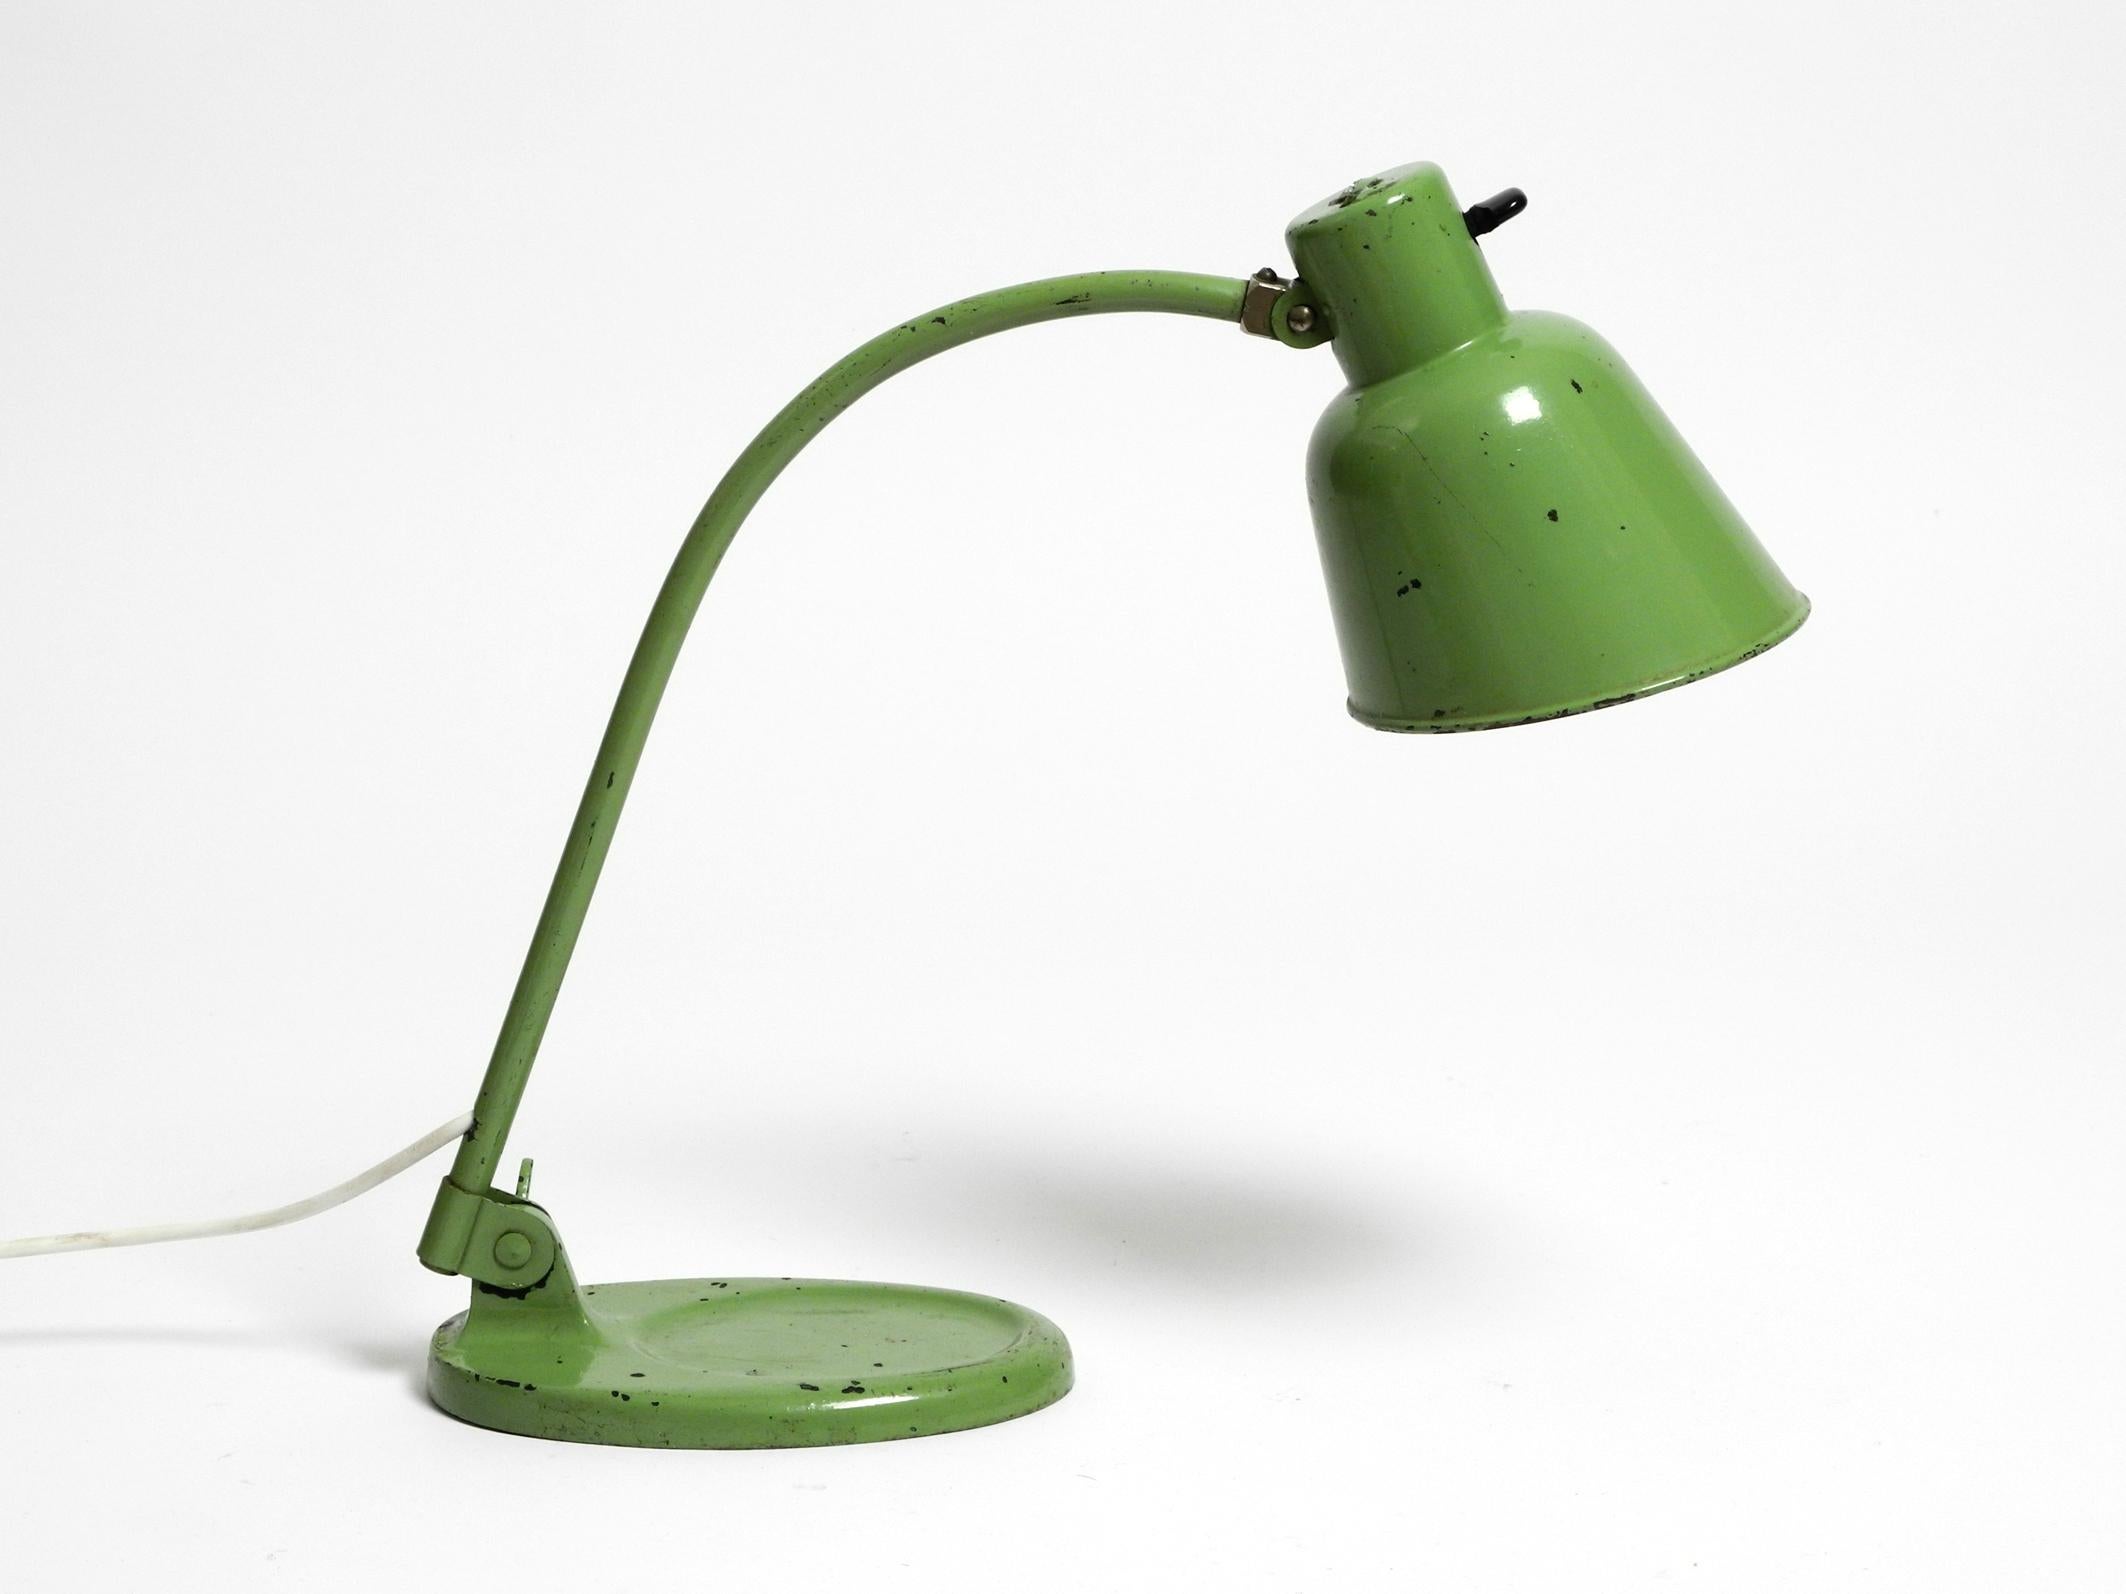 Original 1930s table lamp by Christian Dell for Bünte & Remmler, Germany.
Model MATADOR handcrafted in a rare industrial green.
Victor Bünte and Franz Remmler first made petroleum lamps.
In the 1920s and 1930s, Bünte & Remmler began producing